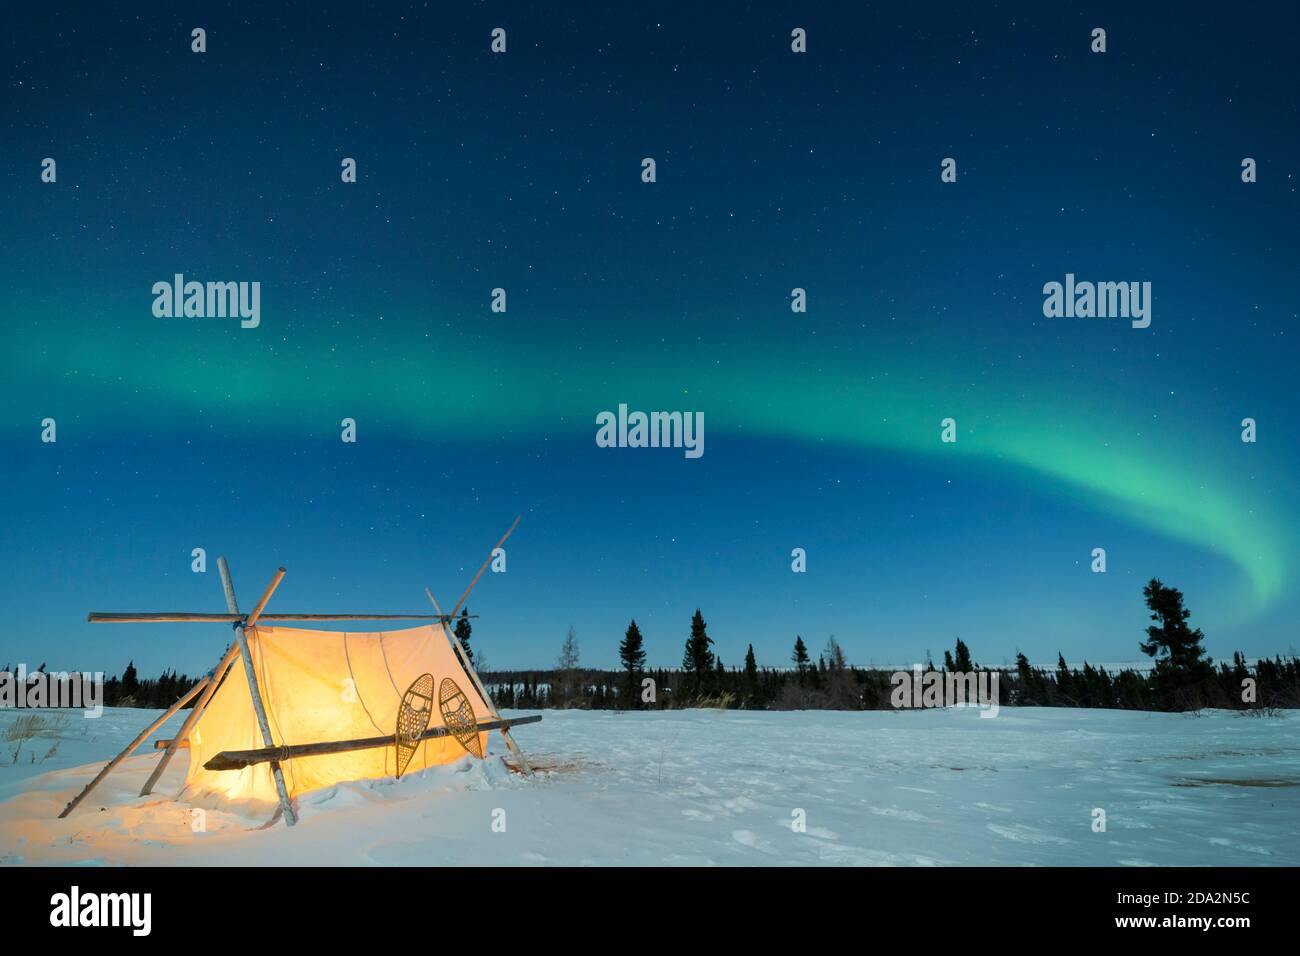 Trappers tent with snowshoes and nightsky with Aurora borealis, Northern lights, Wapusk National Park, Manitoba, Canada Stock Photo